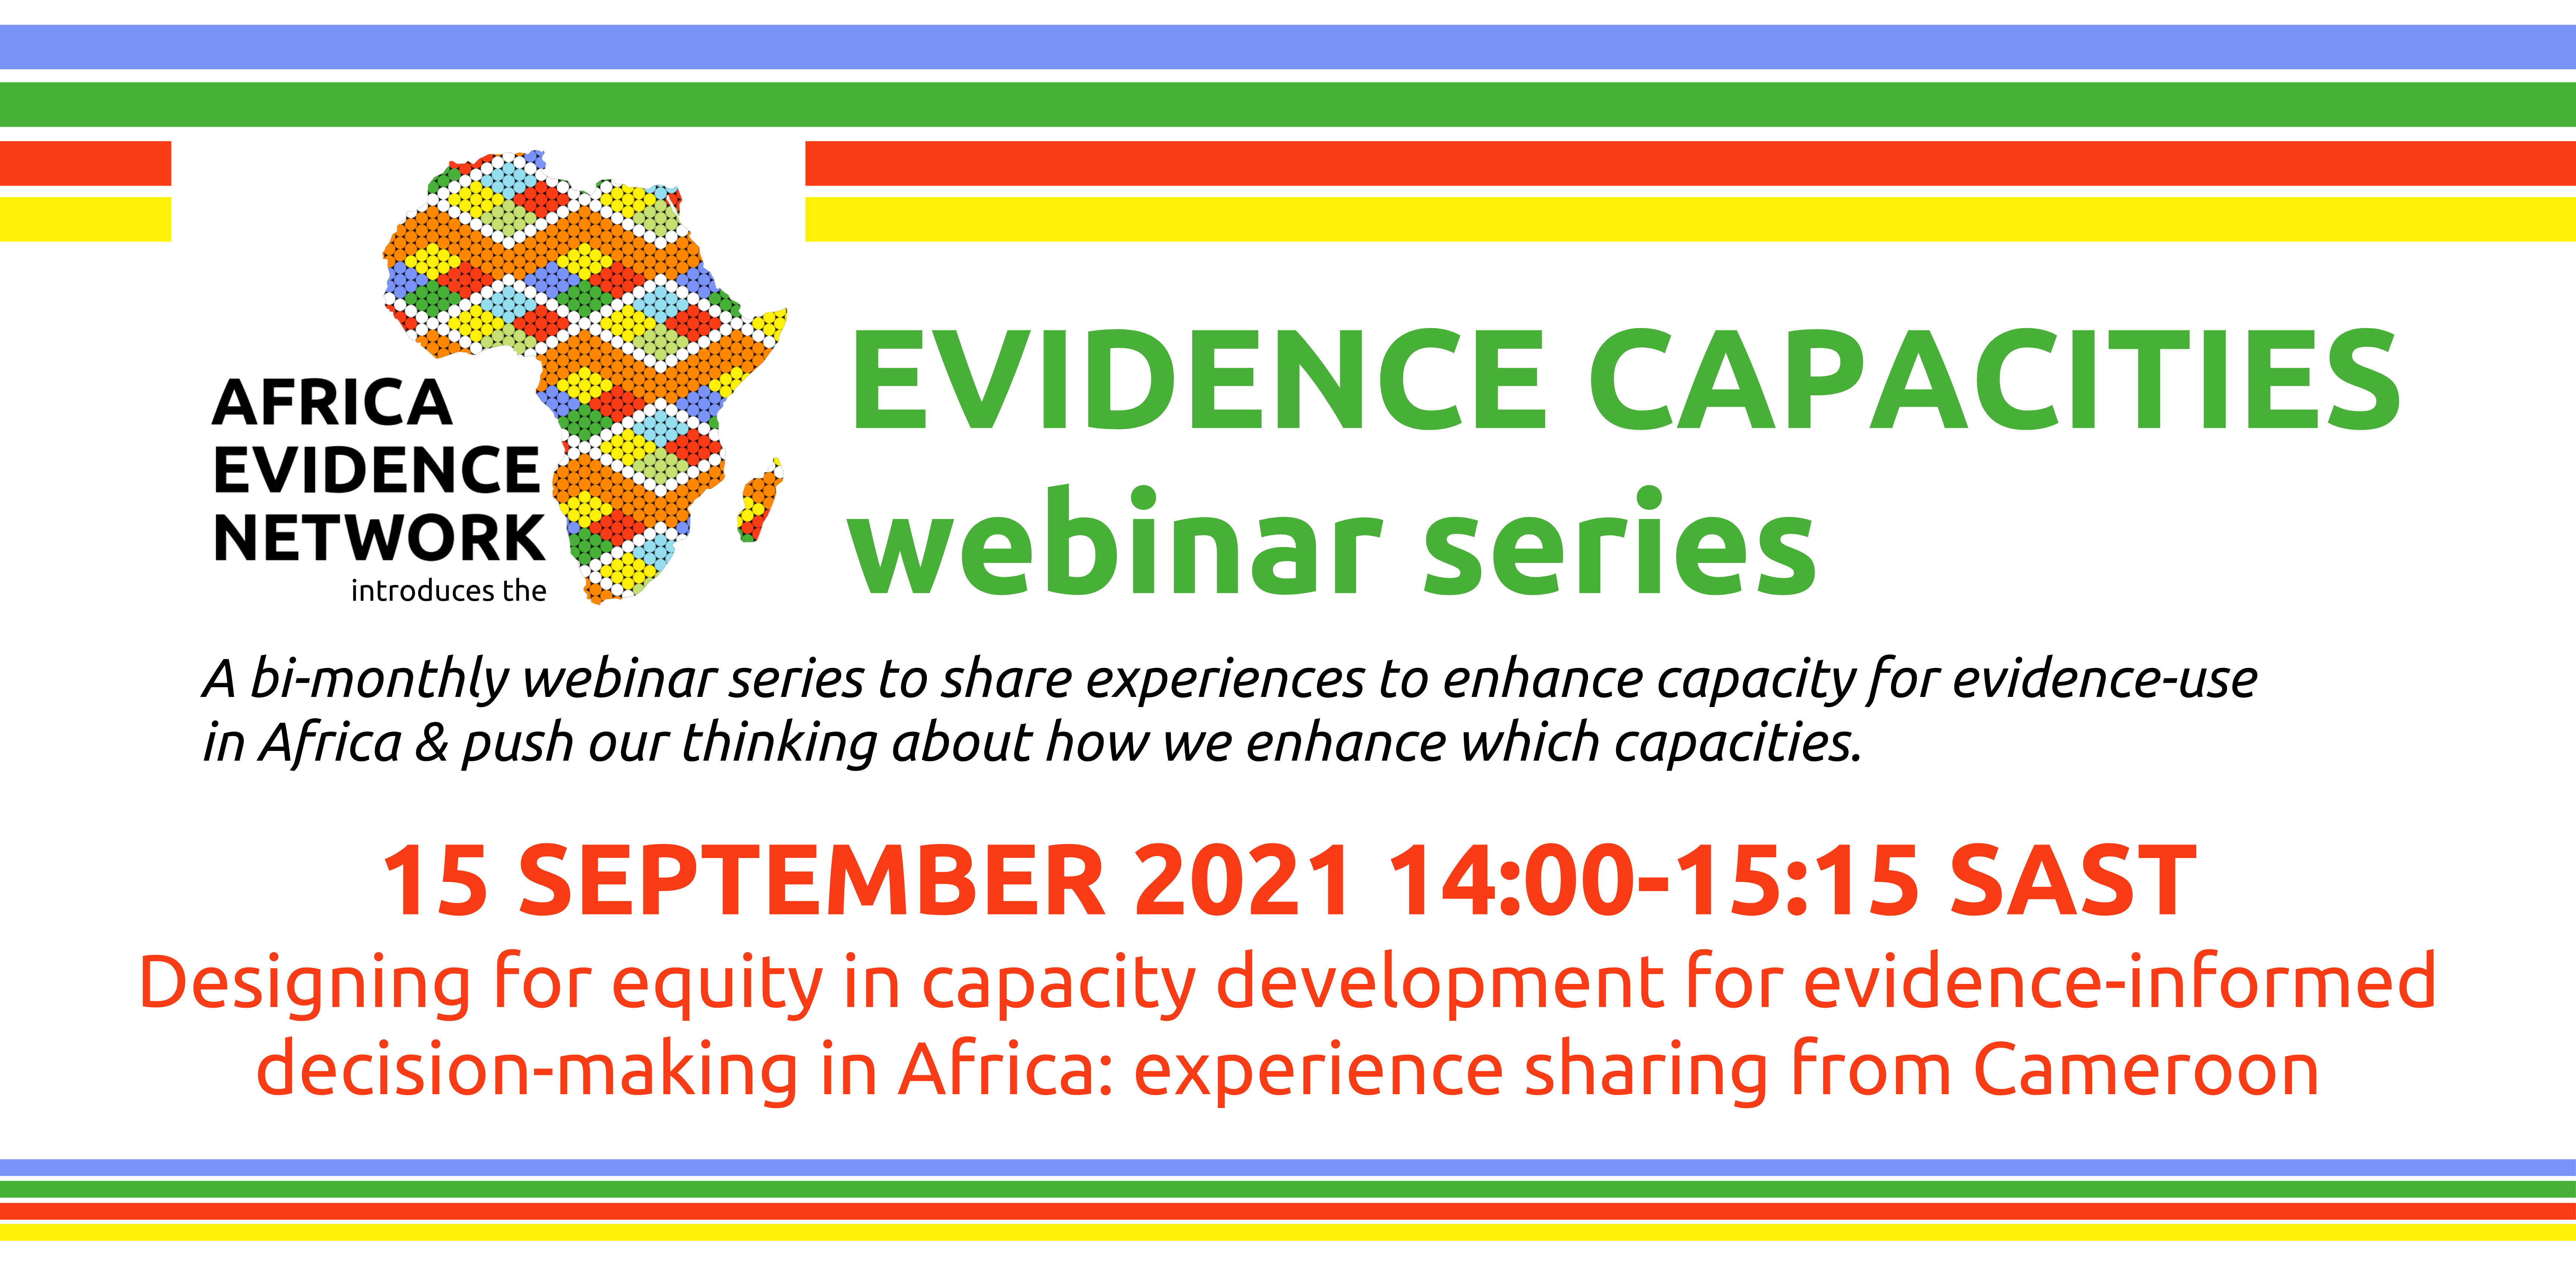 Designing equity into evidence-informed decision-making capacity development in Africa: Experiences from Cameroon